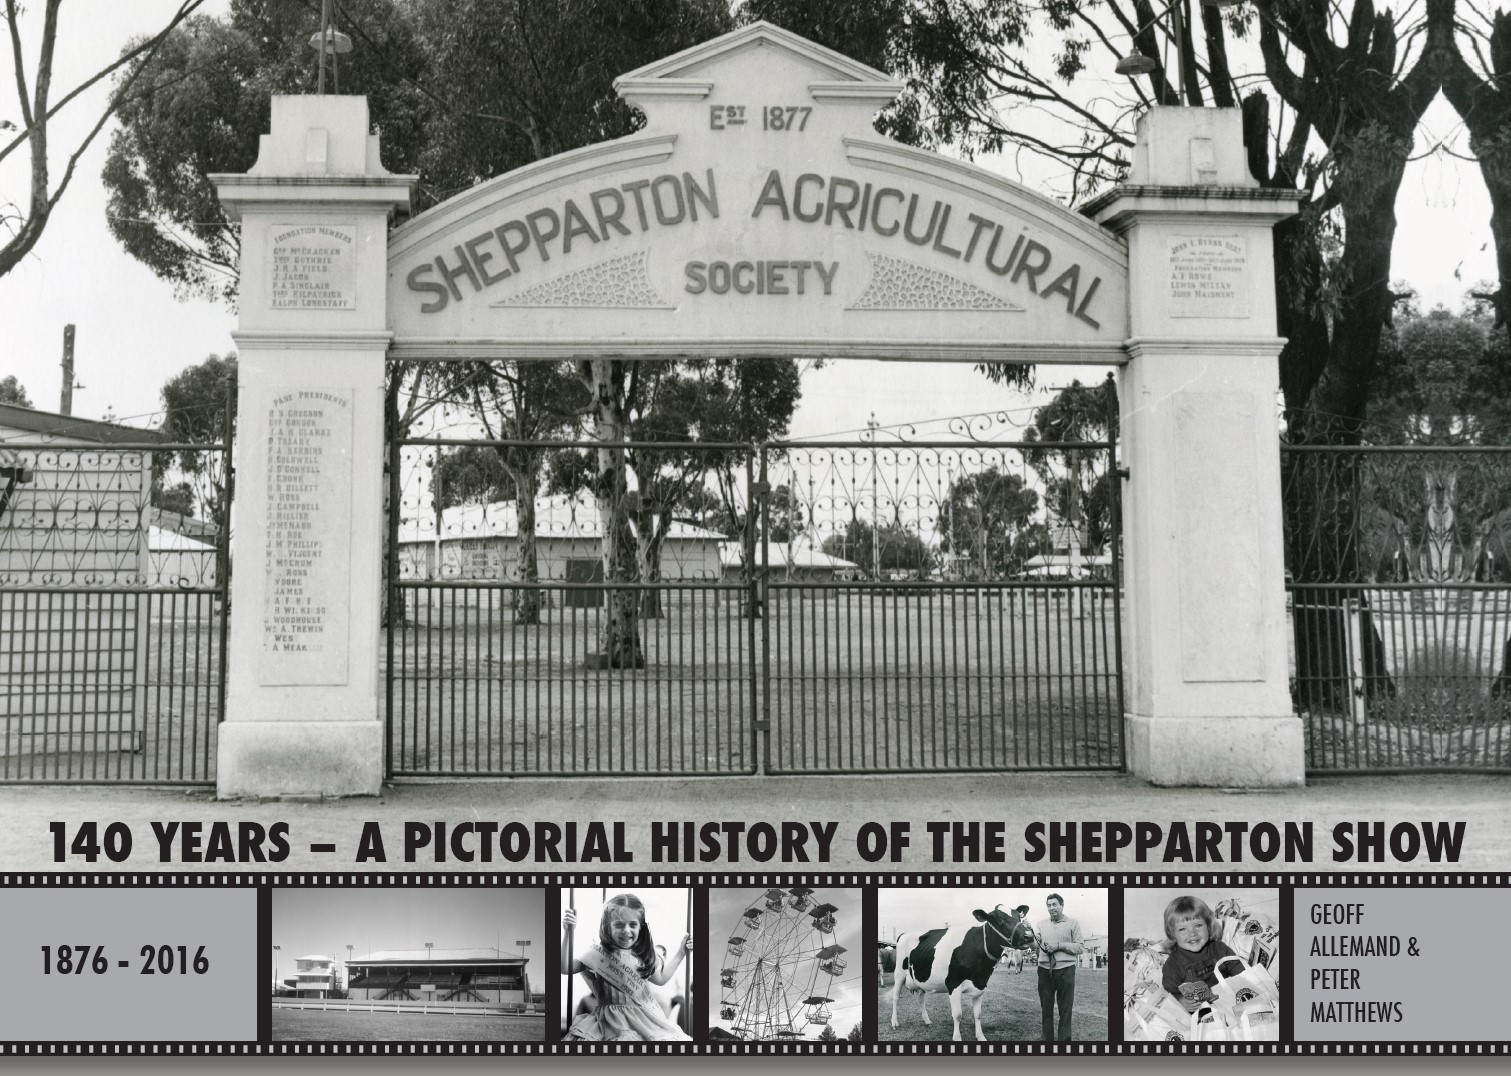 140 Years - A Pictorial History of the Shepparton Show